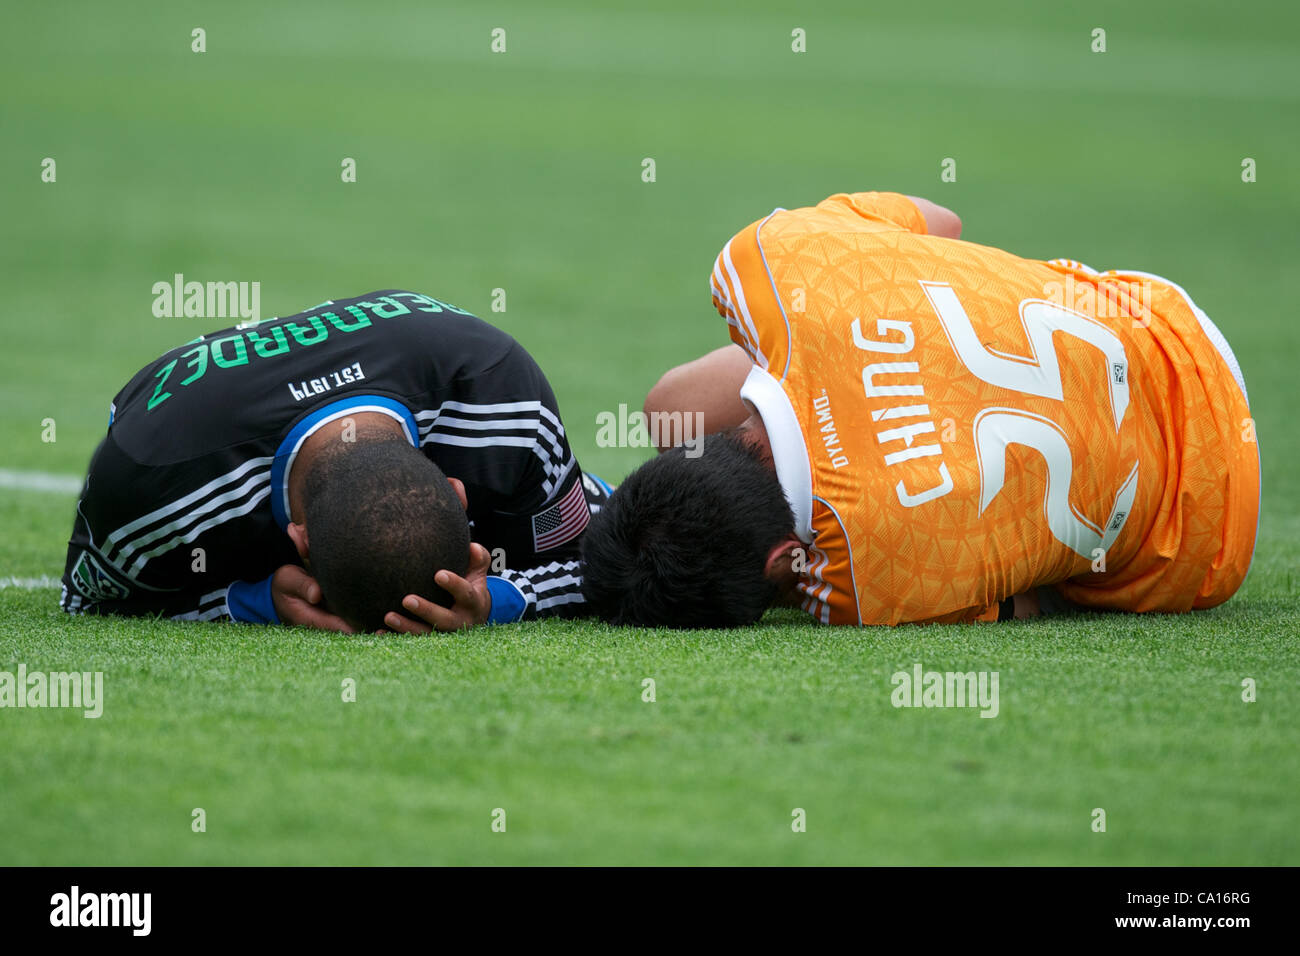 March 17, 2012 - San Francisco, California, U.S - Earthquakes defender Victor Bernardez (26) and Dynamo forward Brian Ching (25) hold their heads after colliding in the box during the MLS match between the San Jose Earthquakes and Houston Dynamo at AT&T Park in San Francisco, CA.  The Dynamo lead 1- Stock Photo